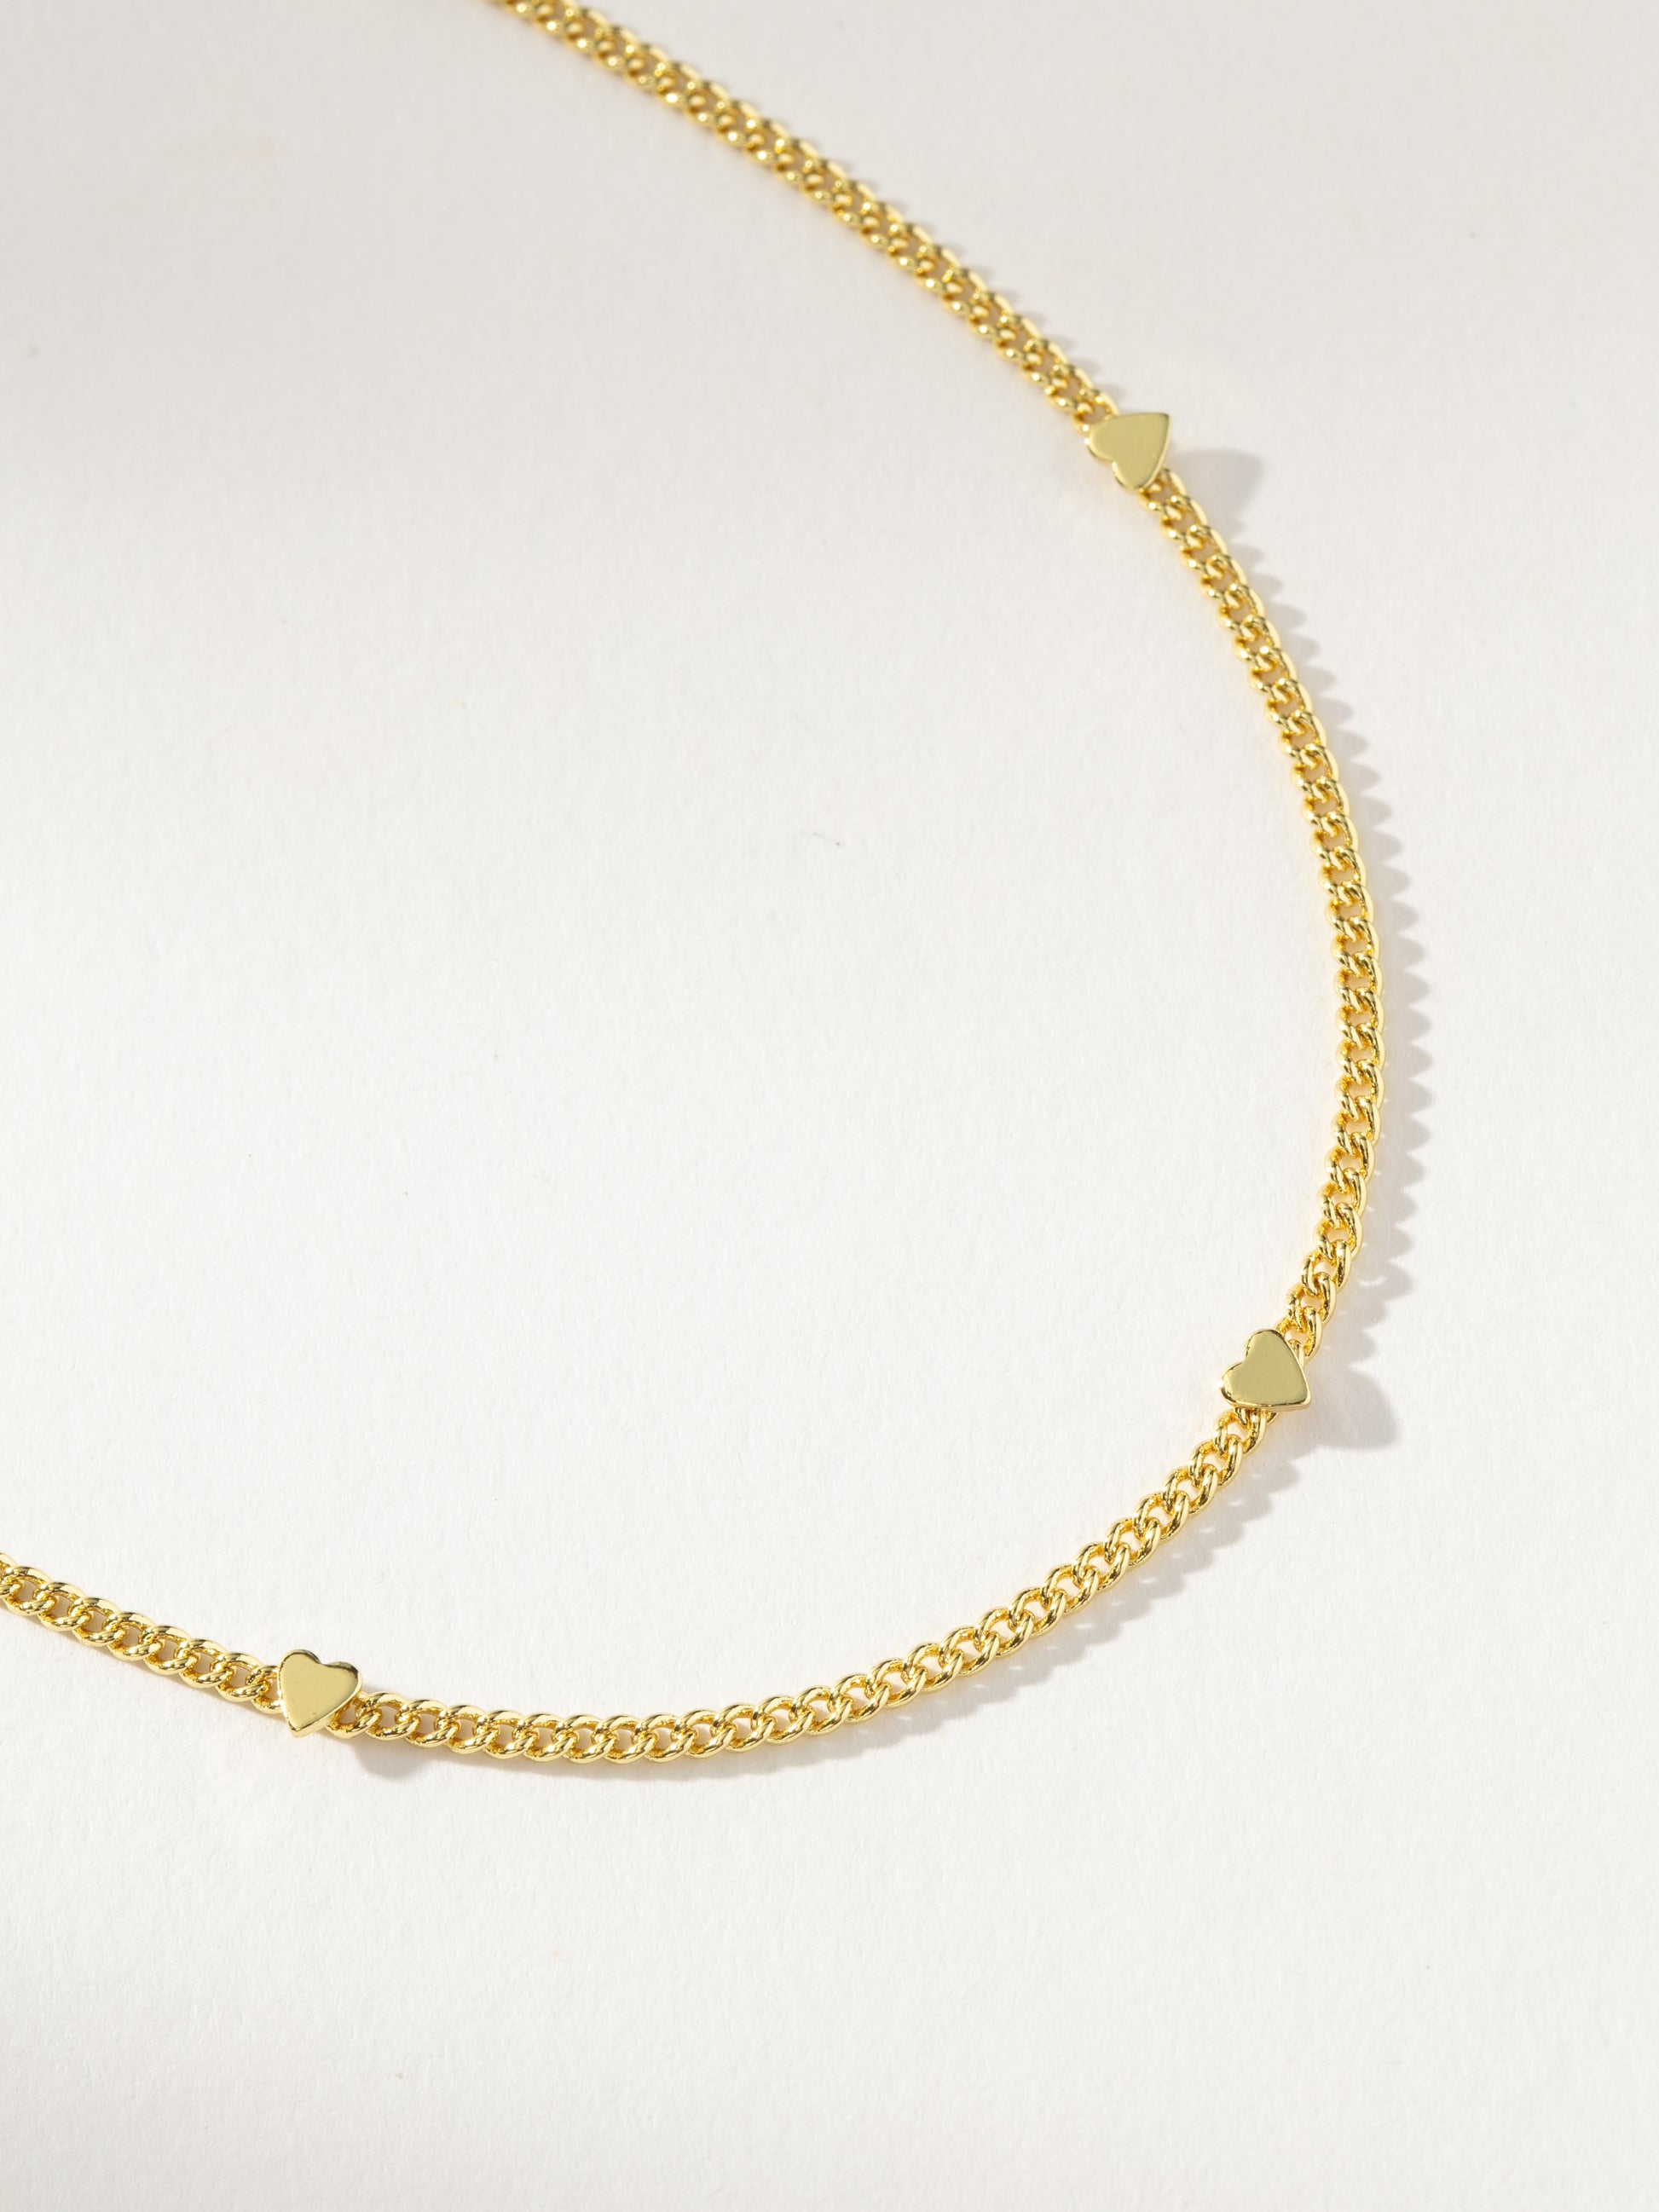 Patterned Heart Necklace | Gold | Product Detail Image | Uncommon James